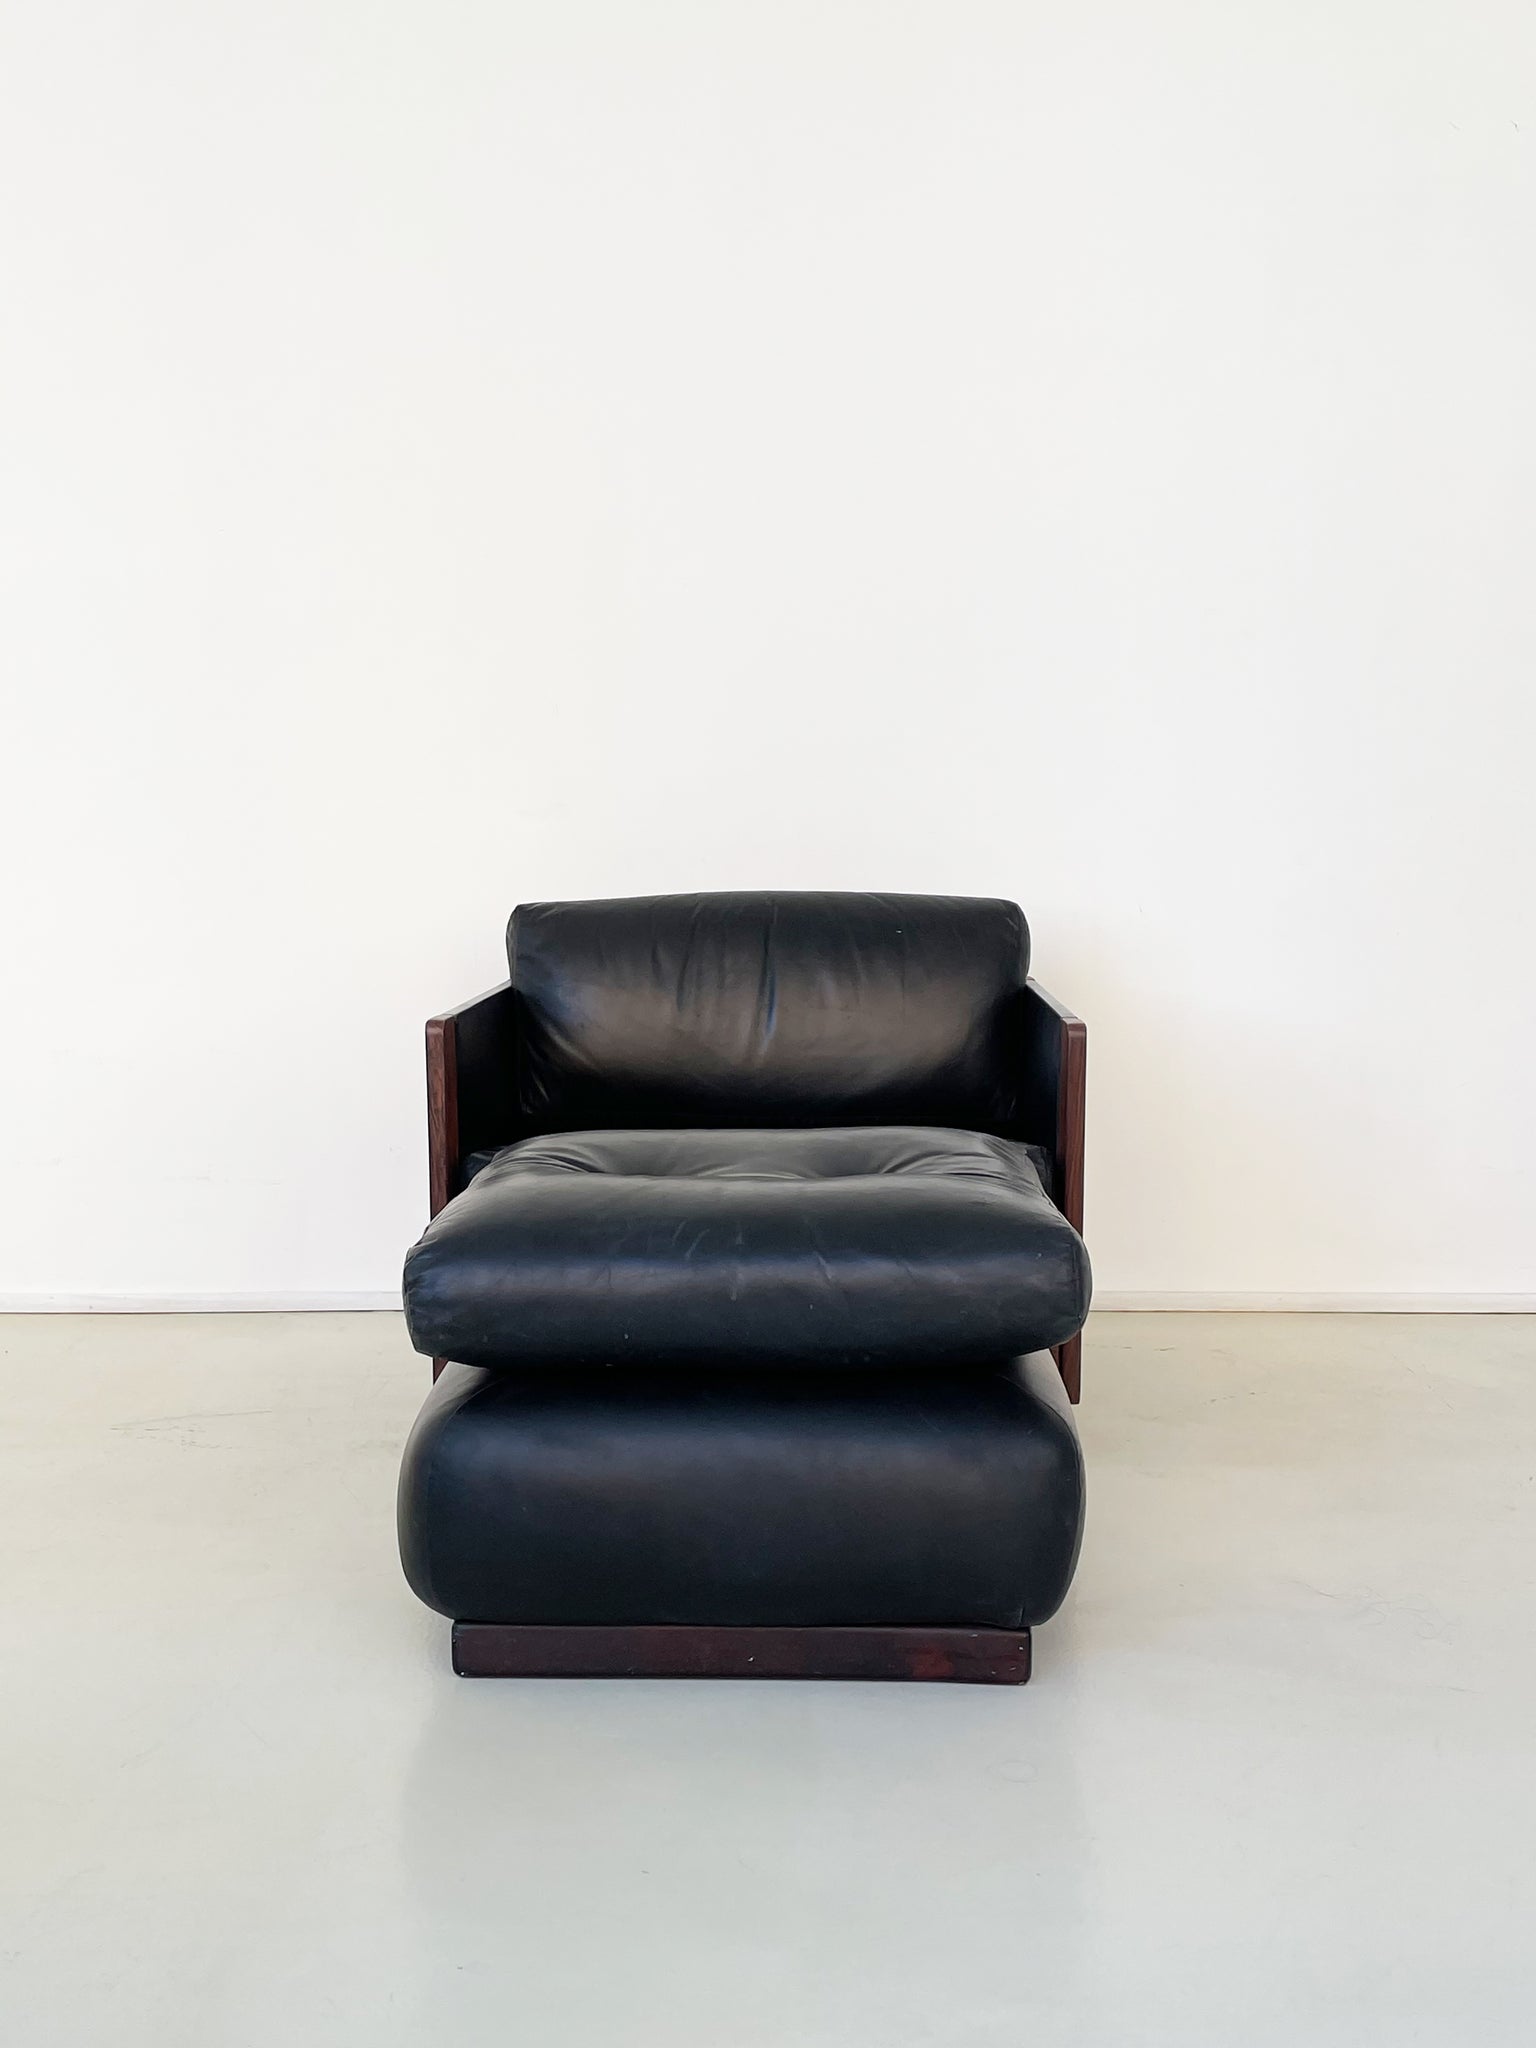 Afra & Tobia Scarpa for Cassina Black Leather and Rosewood Chair & Ottoman